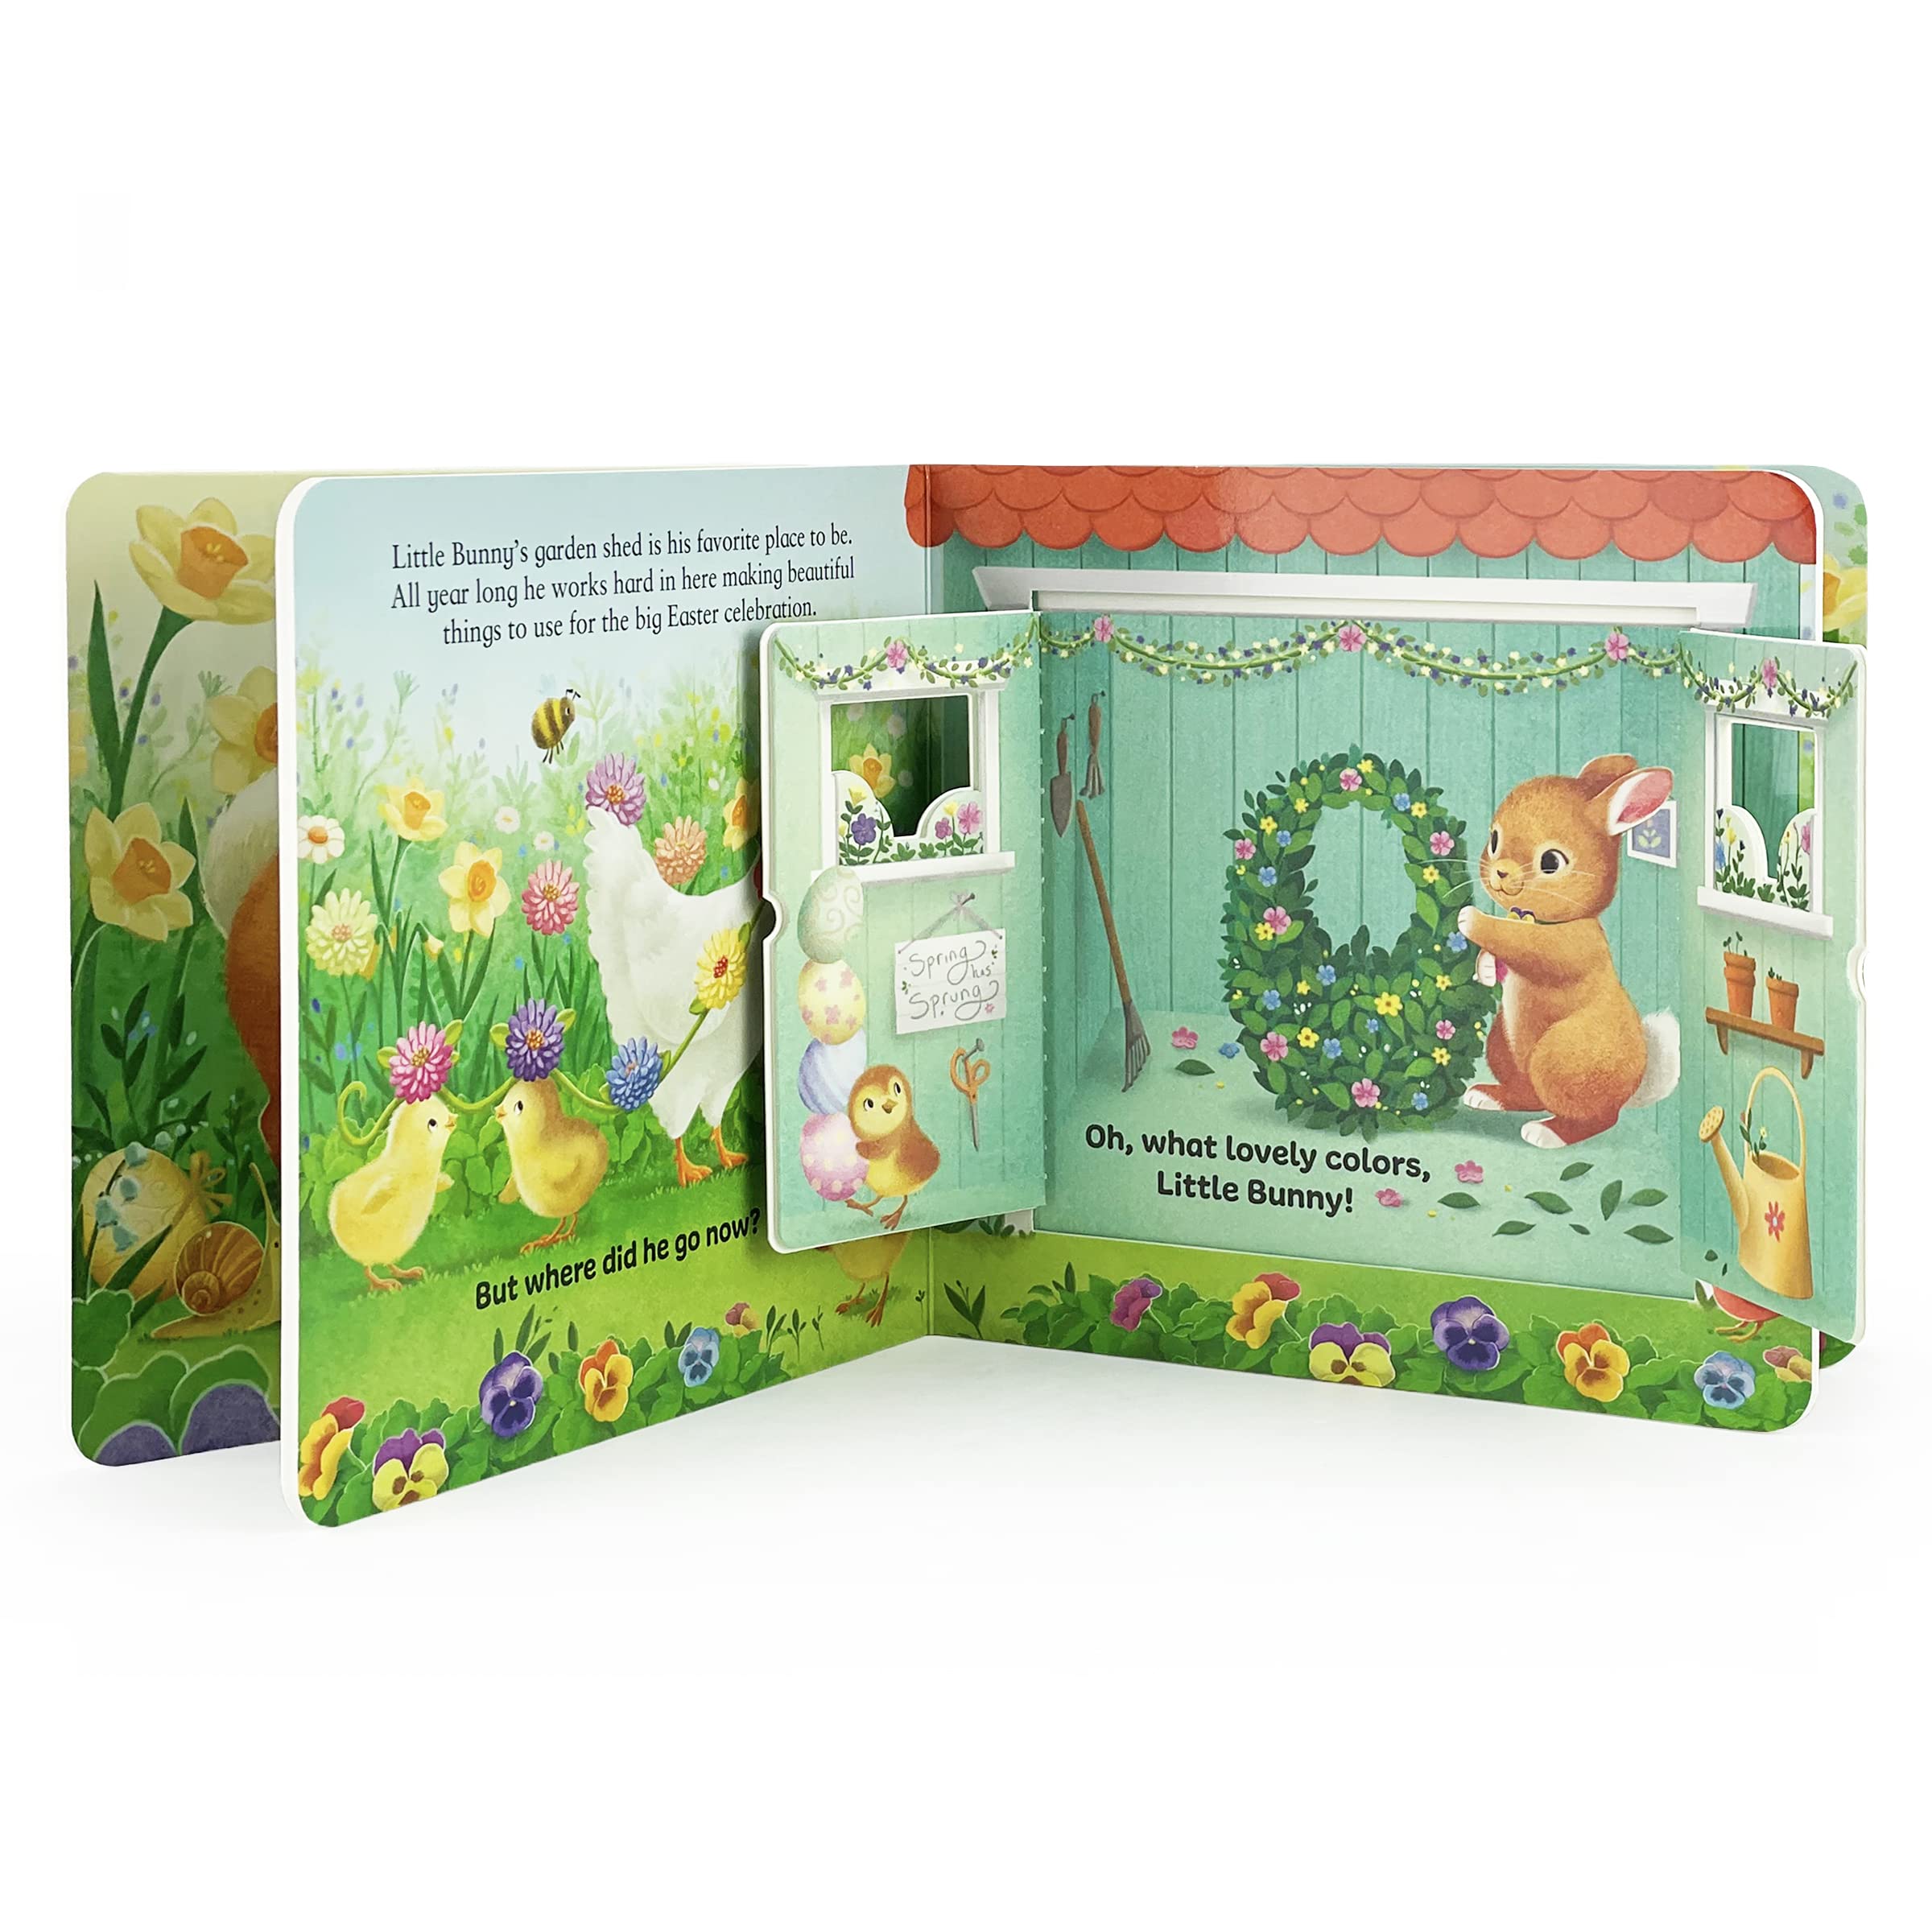 Happy Easter, Little Bunny Deluxe Lift-a-Flap & Pop-Up Surprise Children's Board Book,